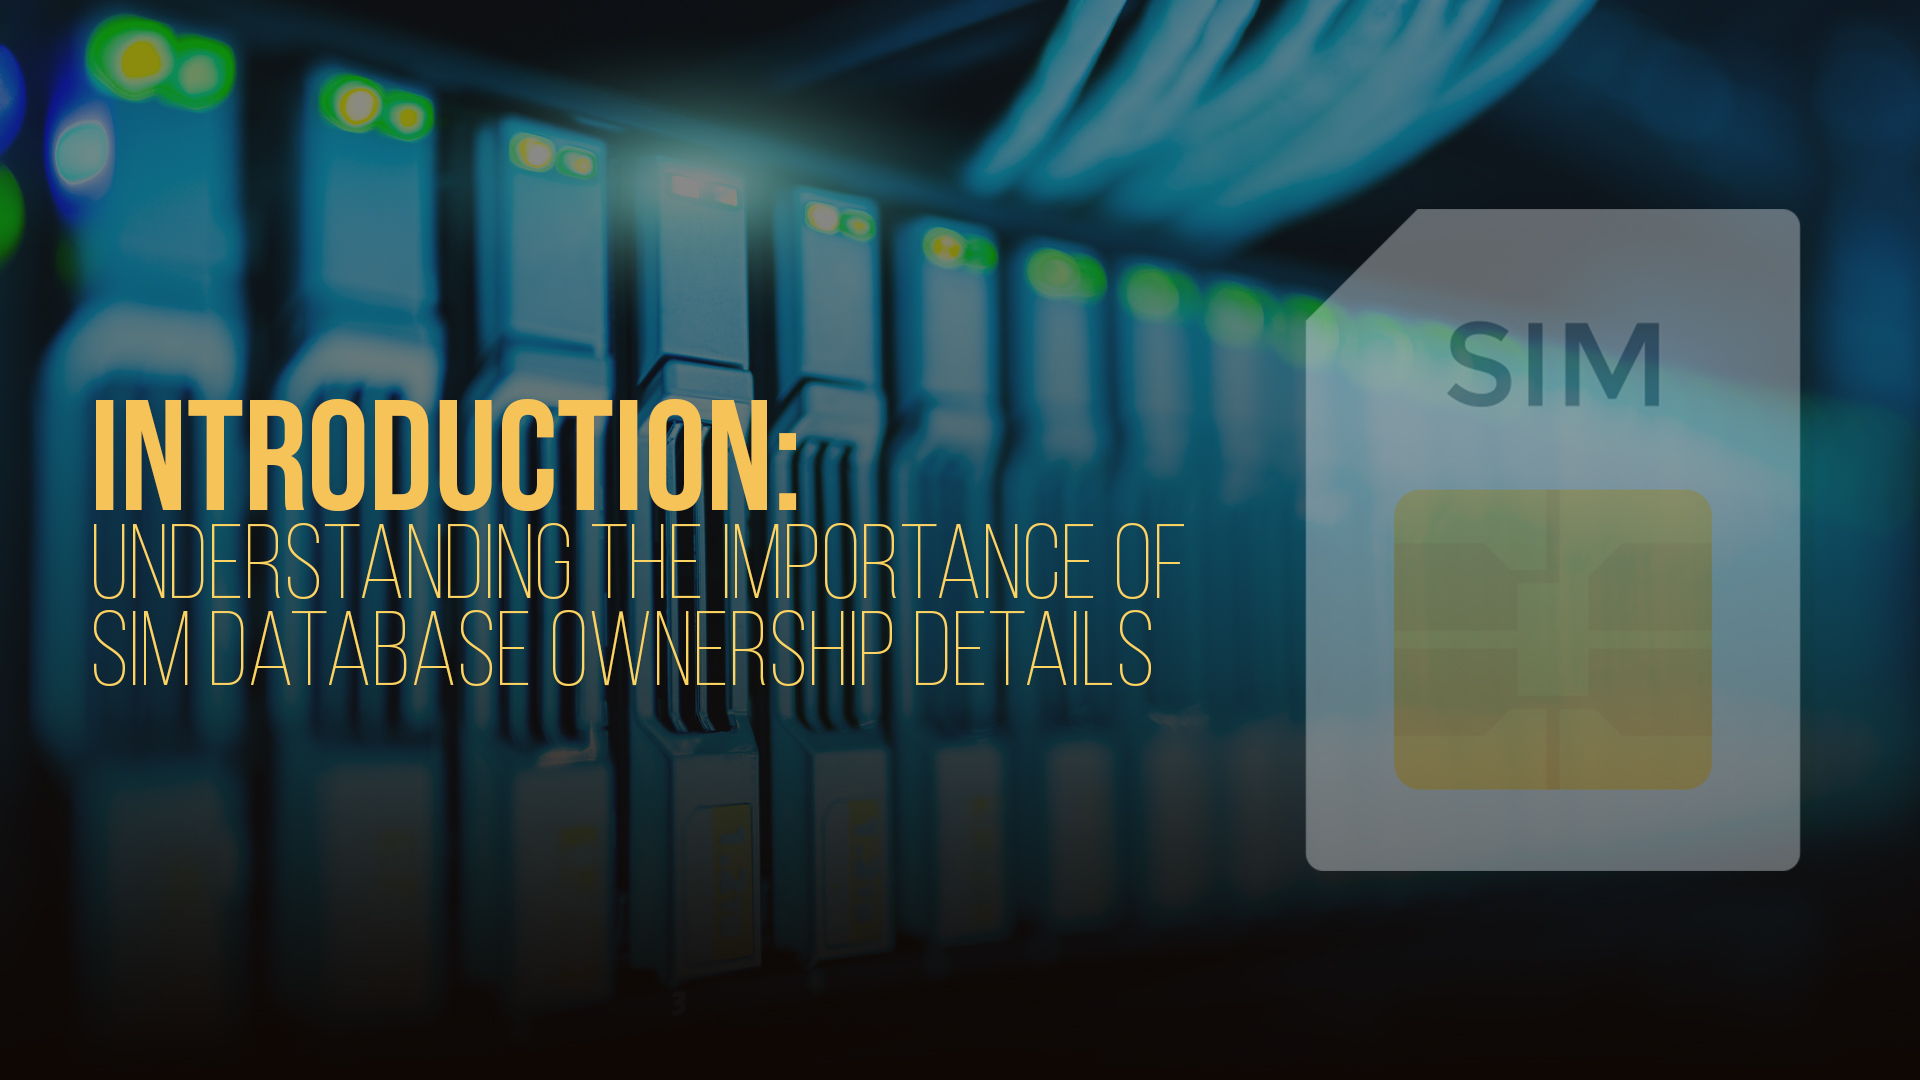 Introduction: Understanding the Importance of SIM Database Ownership Details